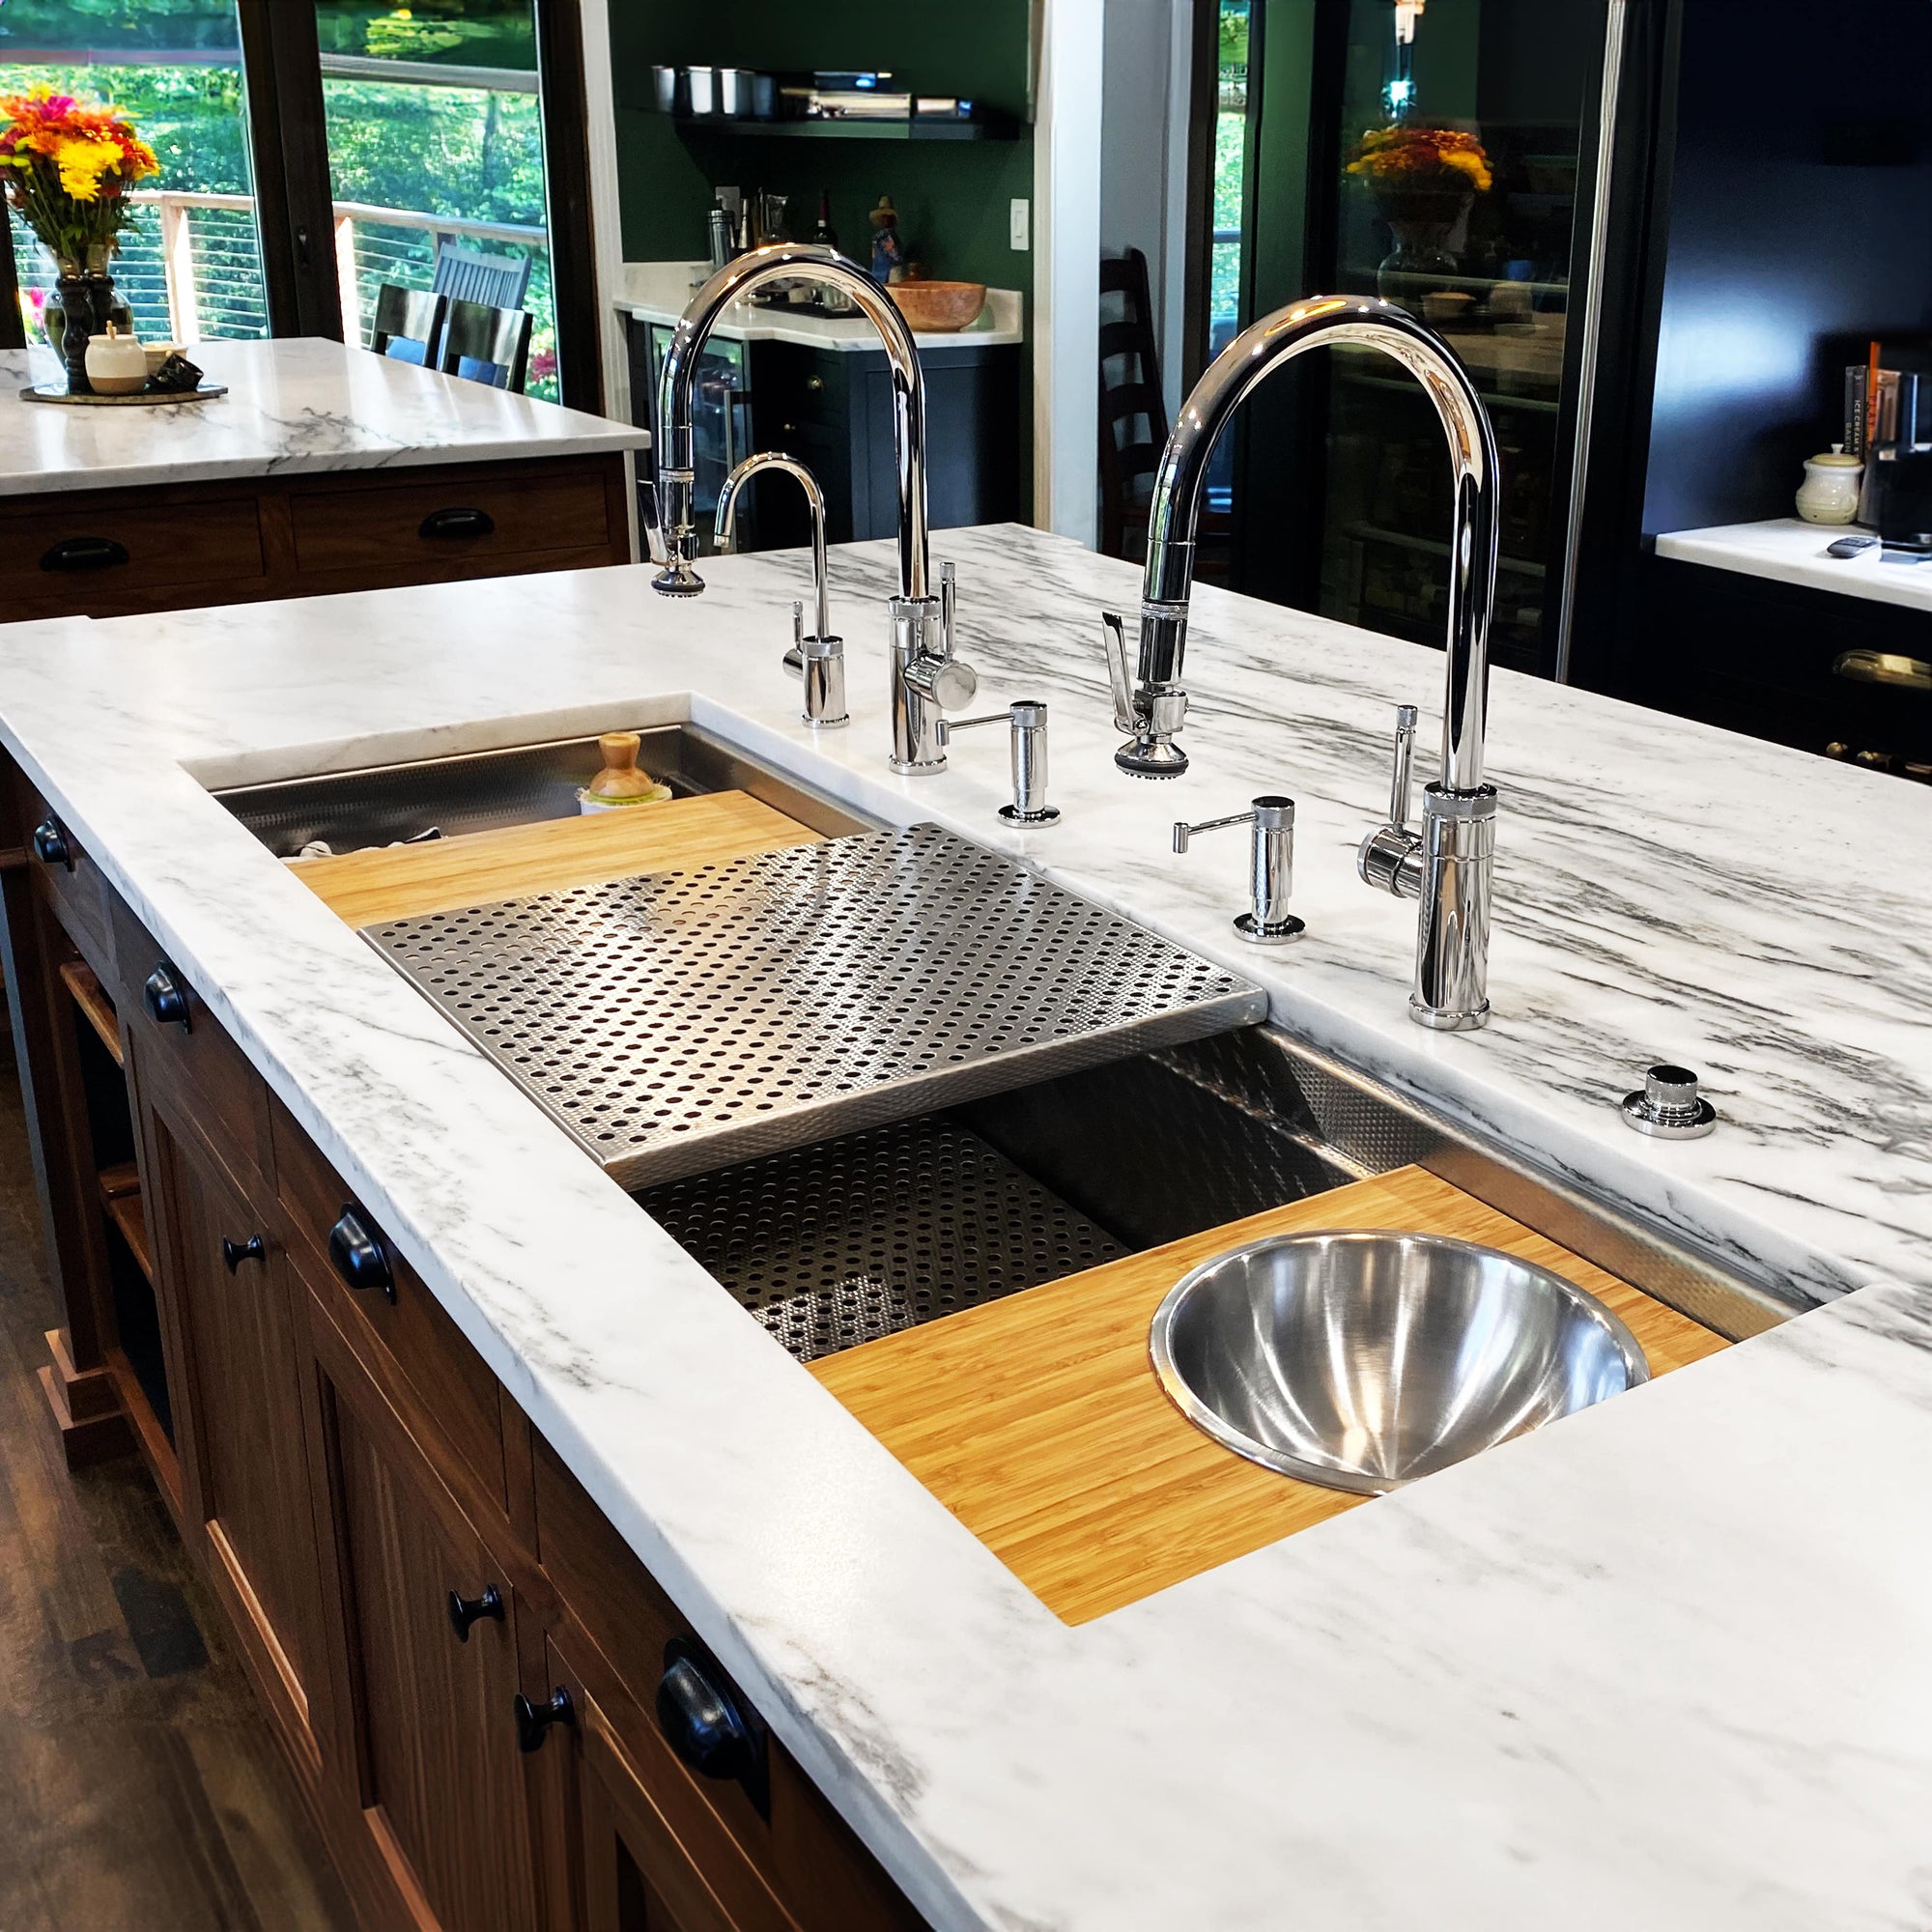 Kitchen Sink Black Stainless Steel Sink Washing, Draining and Cutting 3-in-1 Utility Sink Multi-functional Farmhouse Sink with Kitchen Sink